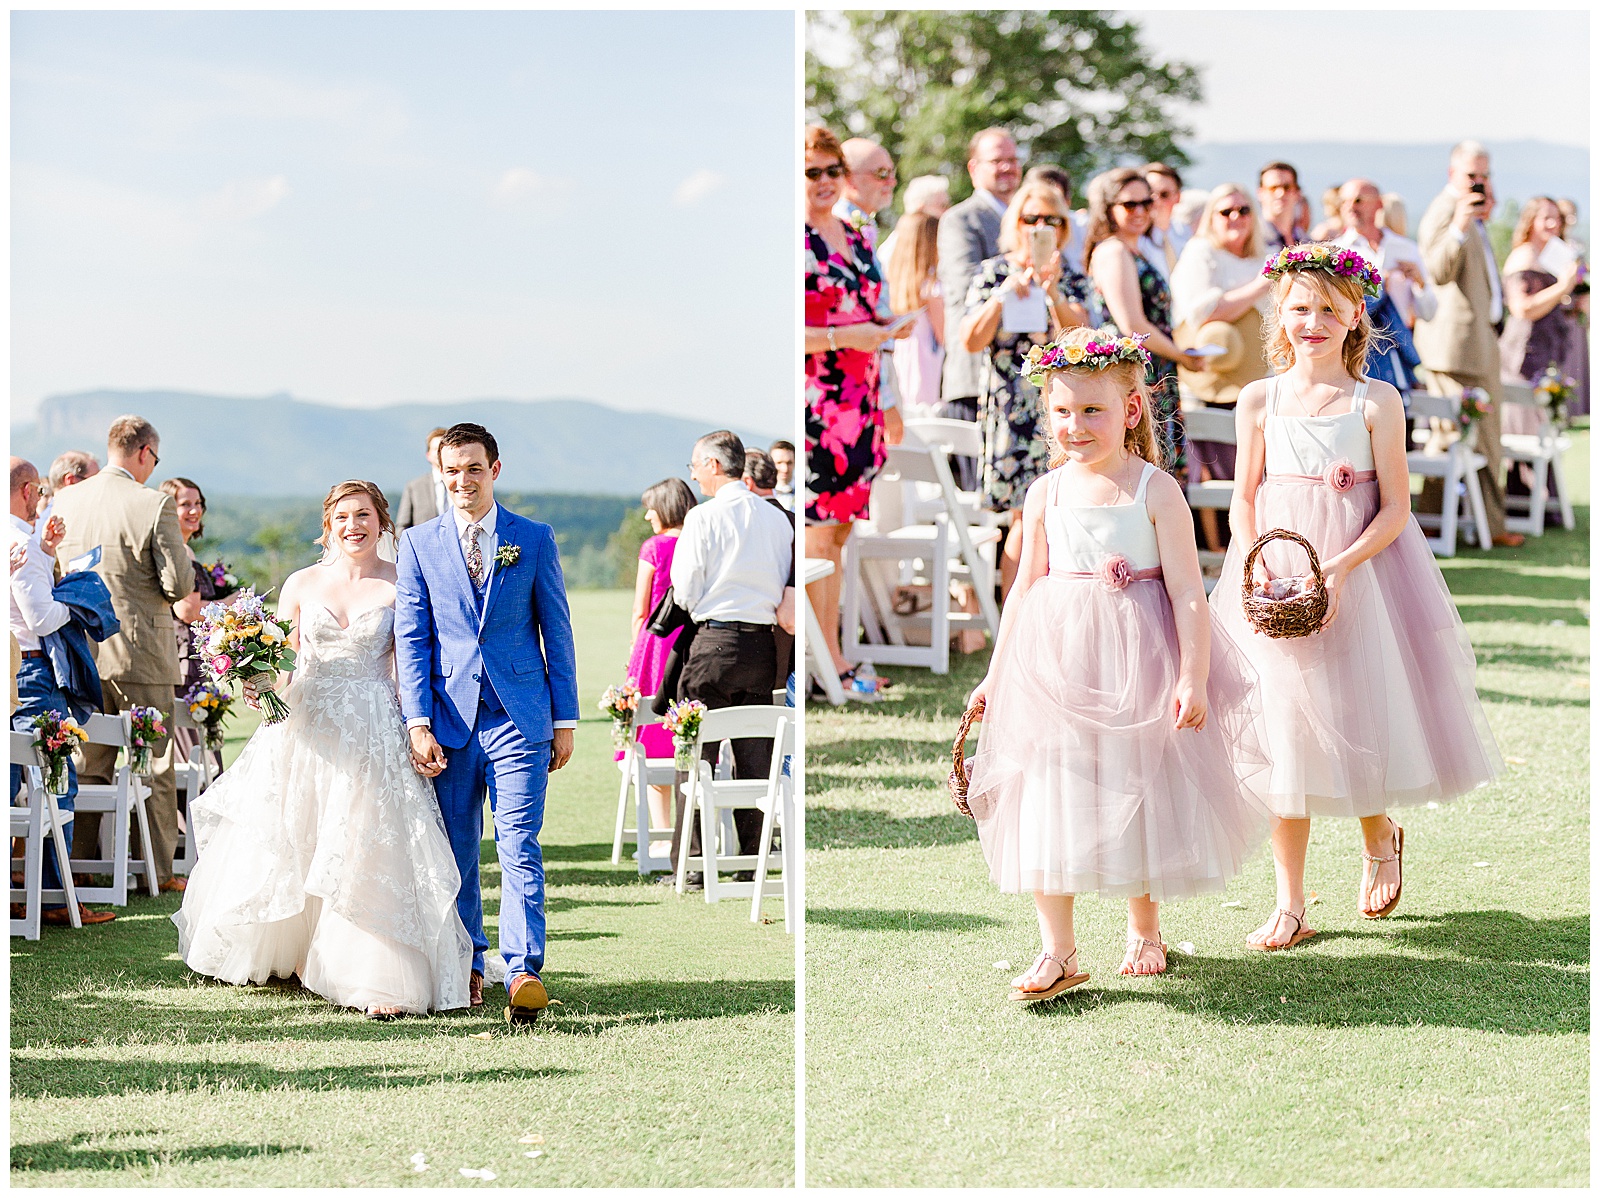 Bride and groom just married and cute flower girls in fluffy pink dresses in Outdoorsy Summer Wedding at North Carolina Lakehouse in the Mountains | check out the full wedding at KevynDixonPhoto.com